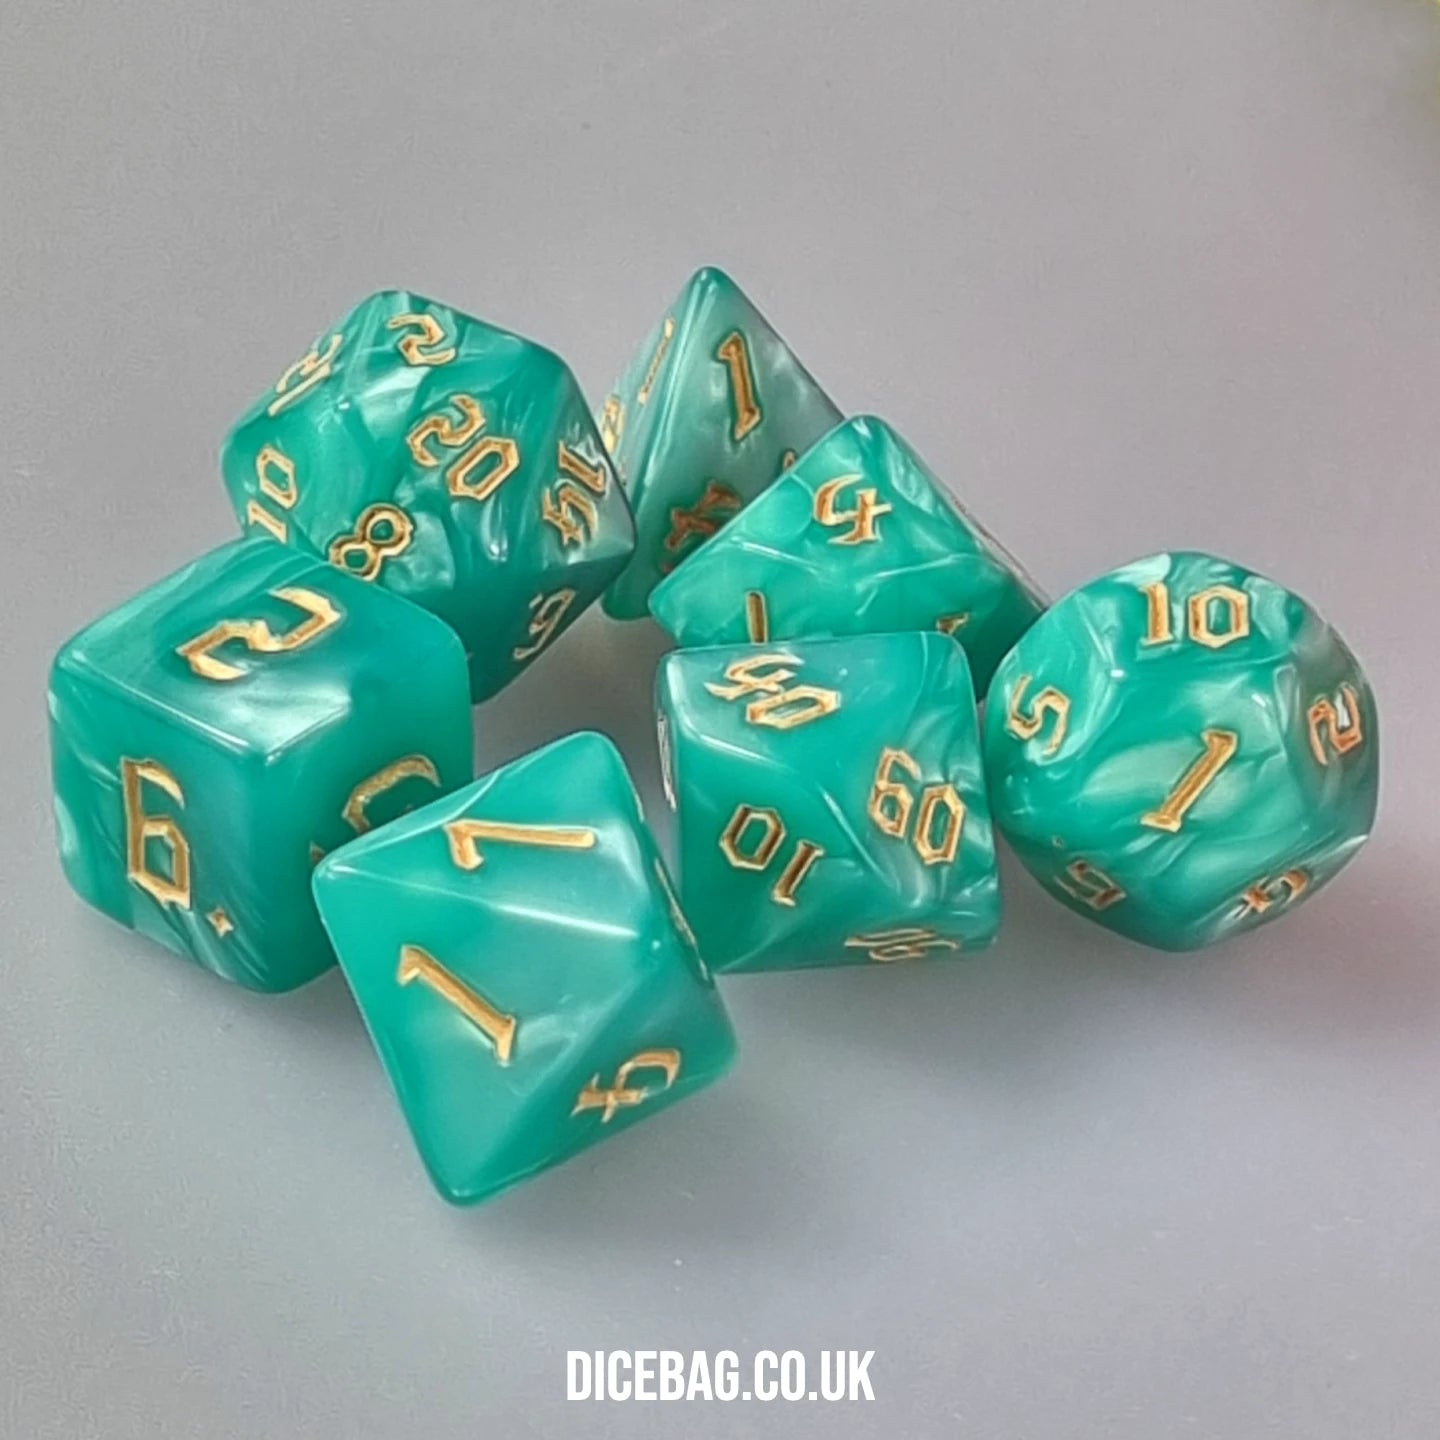 Earthen Gems - Green Acrylic Polyhedral Dungeons & Dragons Dice Set